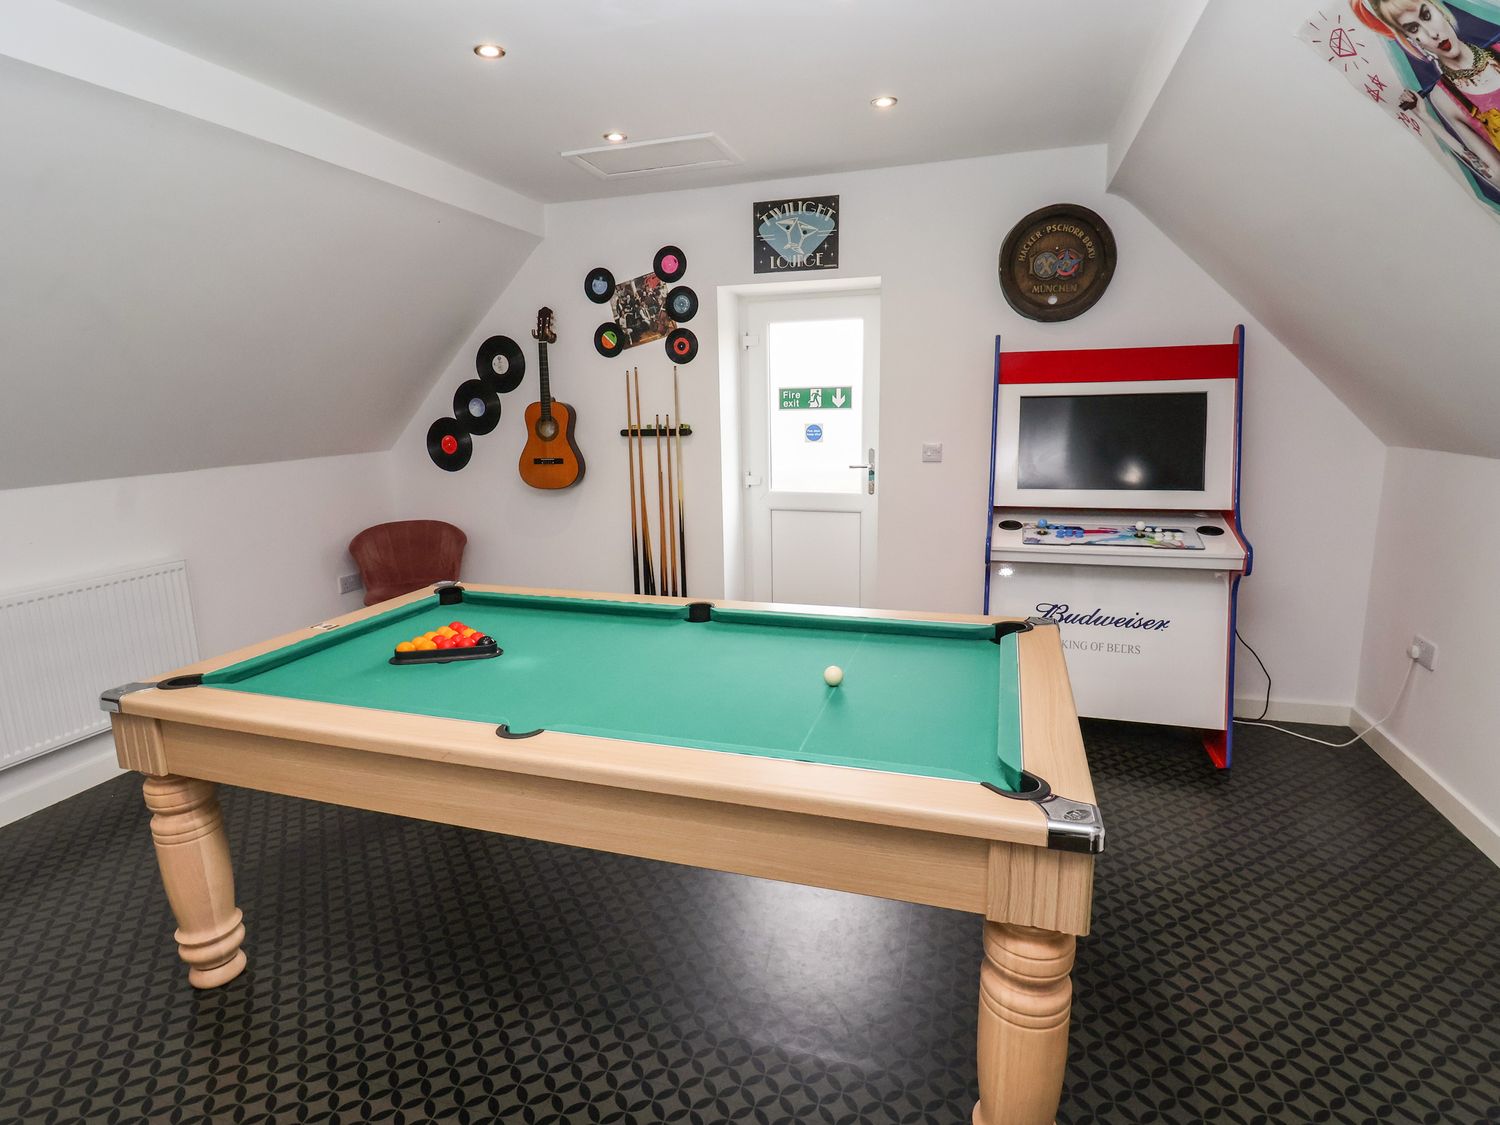 The Old Police House in Withernsea, East Riding of Yorkshire. Games room and hot tub. Close to beach